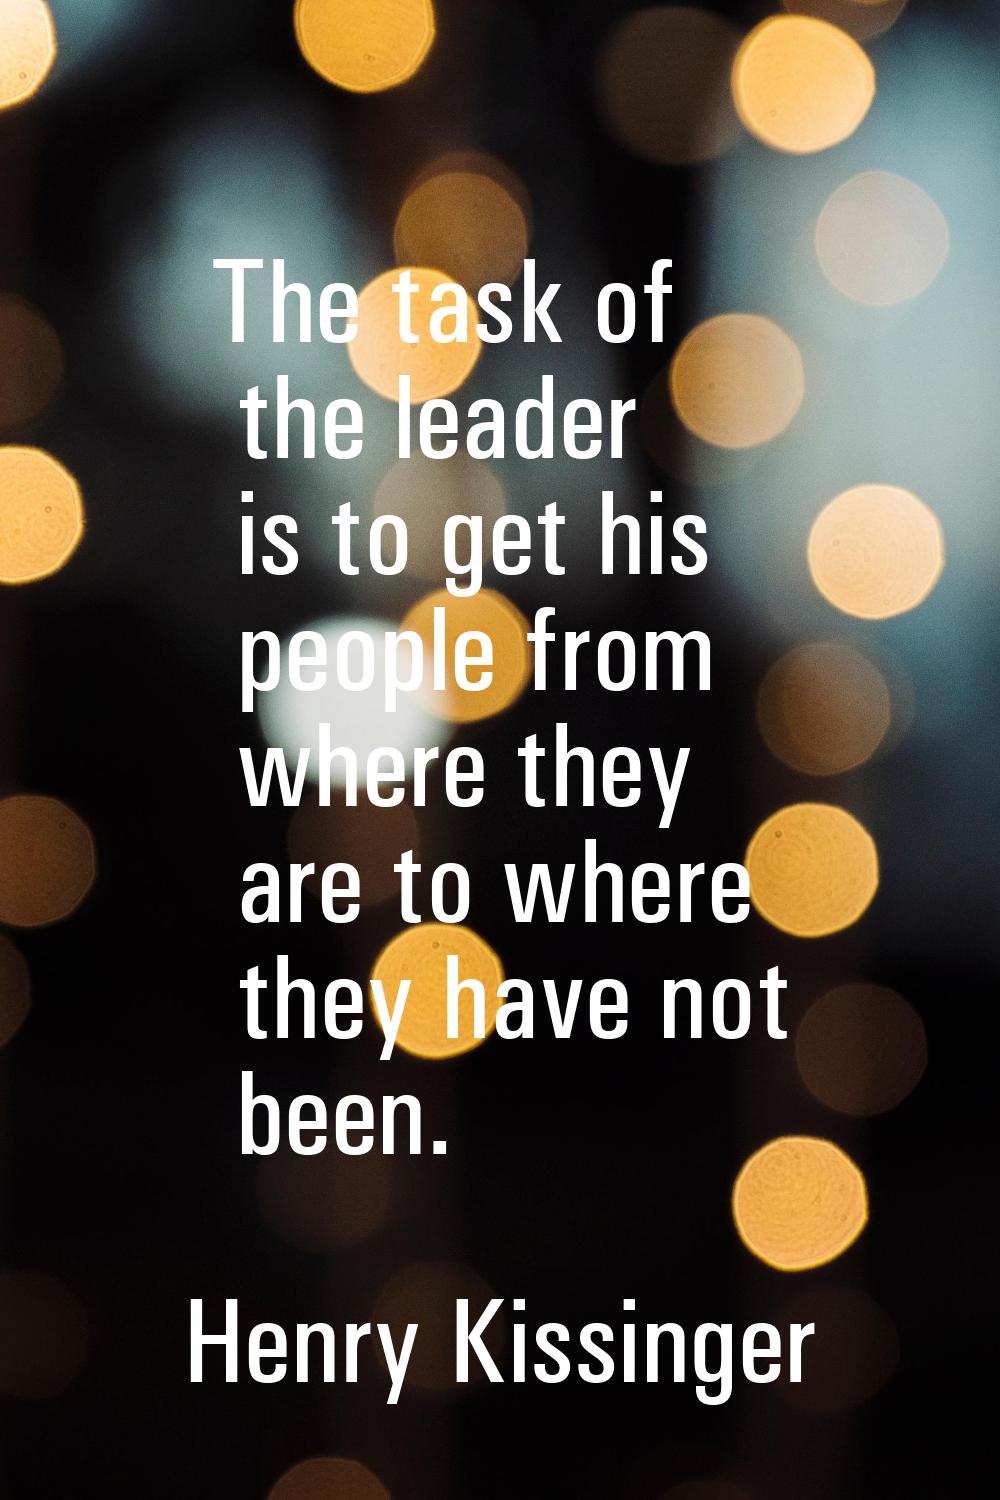 The task of the leader is to get his people from where they are to where they have not been.